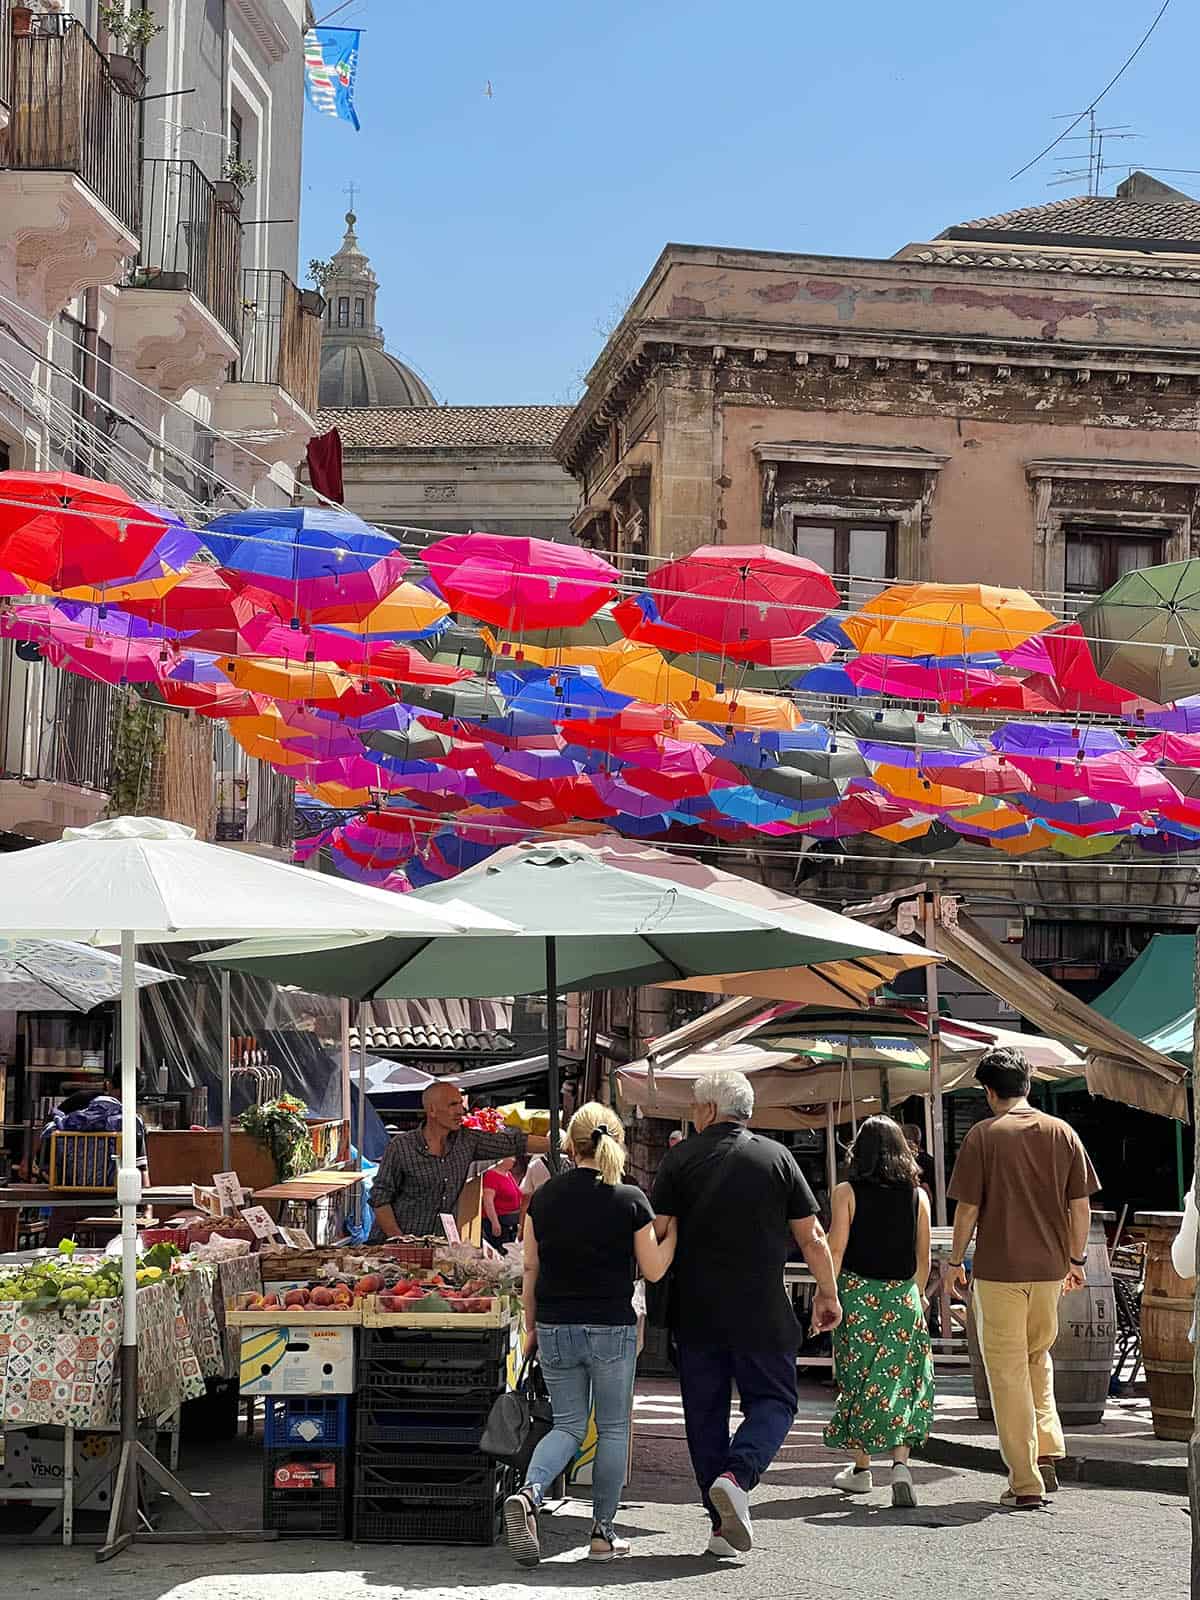 An image of Catania fish market in the sunshine, decorated with brightly coloured umbrellas shading the people below